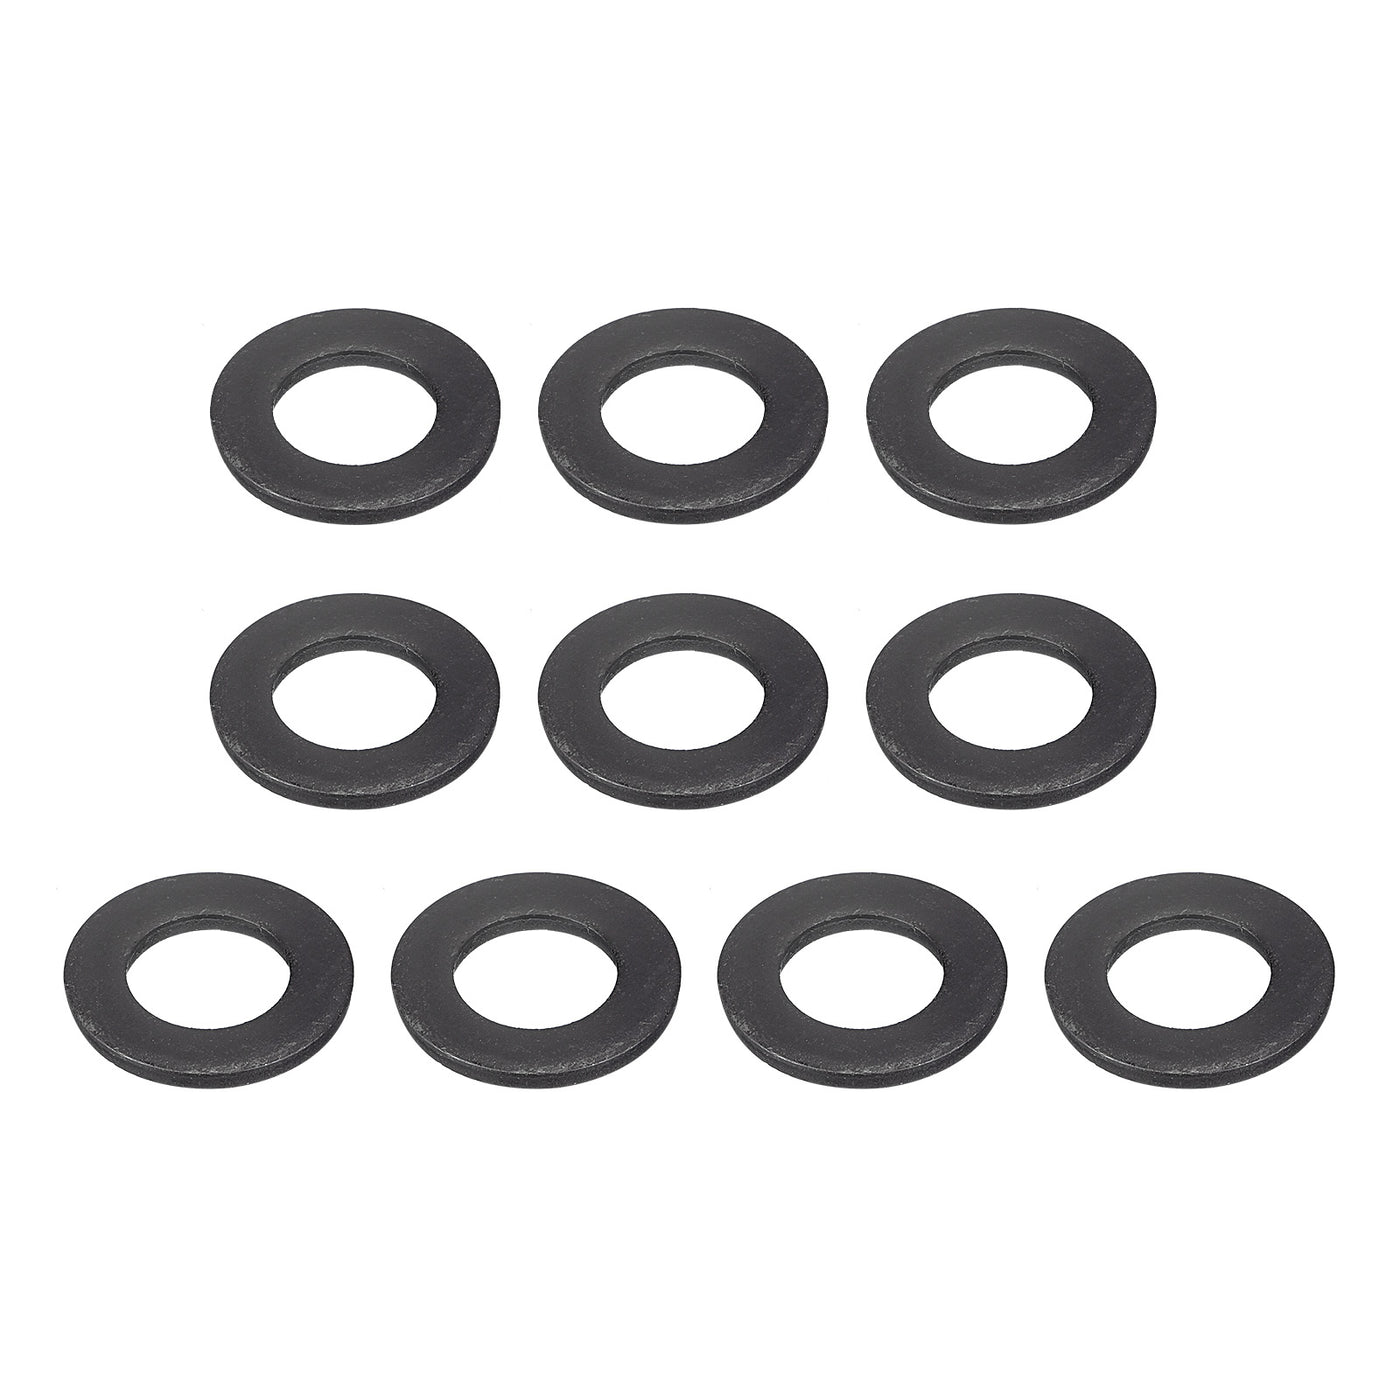 uxcell Uxcell M12 Carbon Steel Flat Washer 10pcs 13x23.5x2.4mm Grade 8.8 Alloy Steel Fasteners